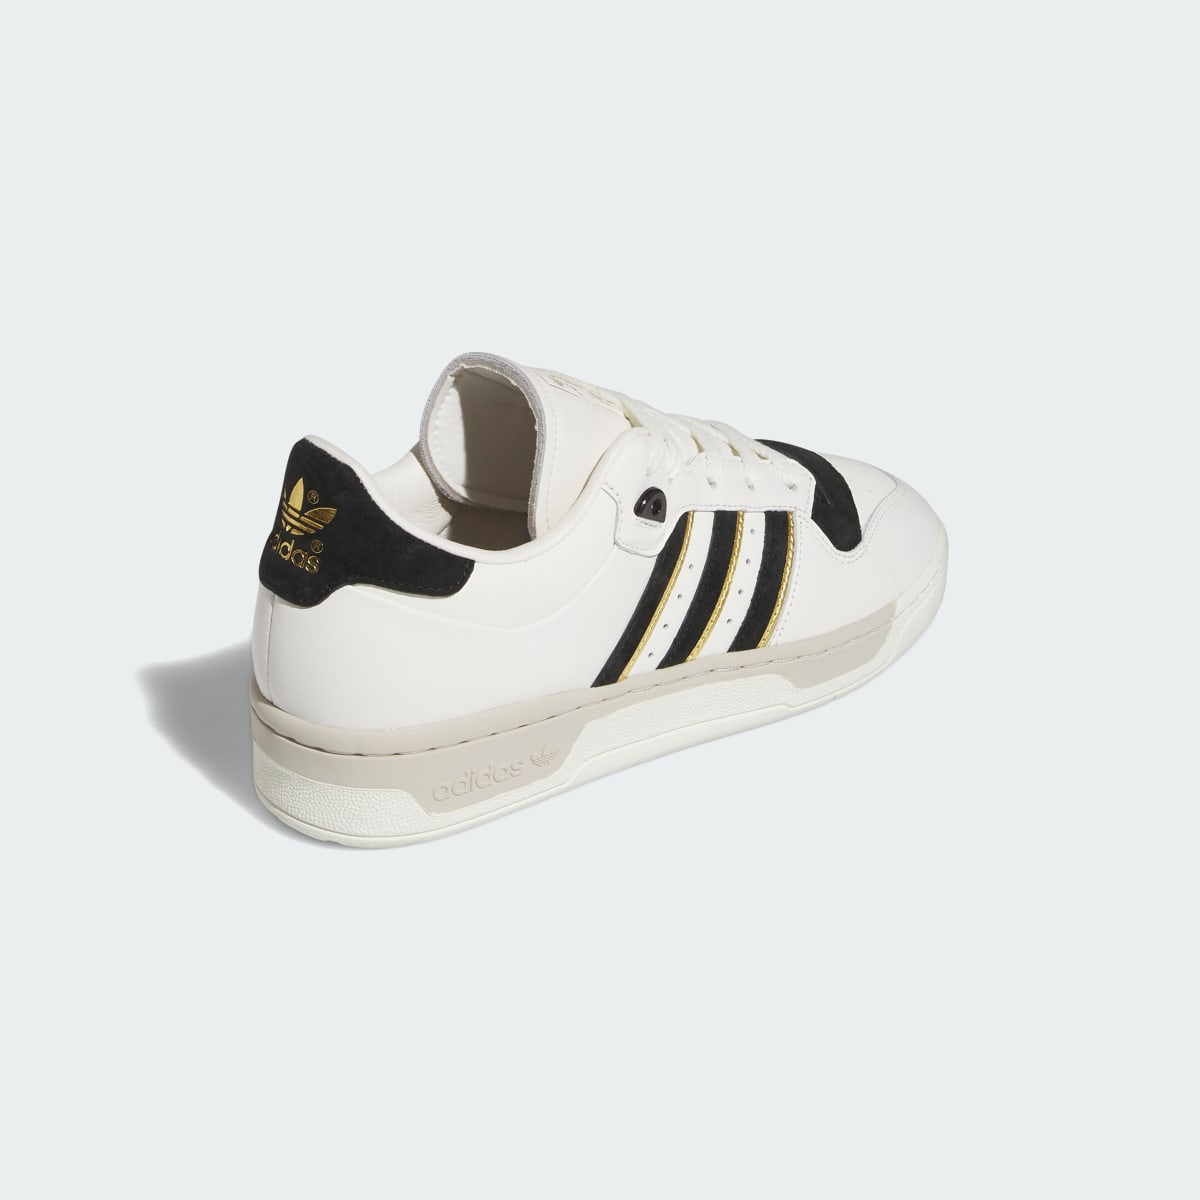 Adidas Sapatilhas Rivalry 86 Low. 6